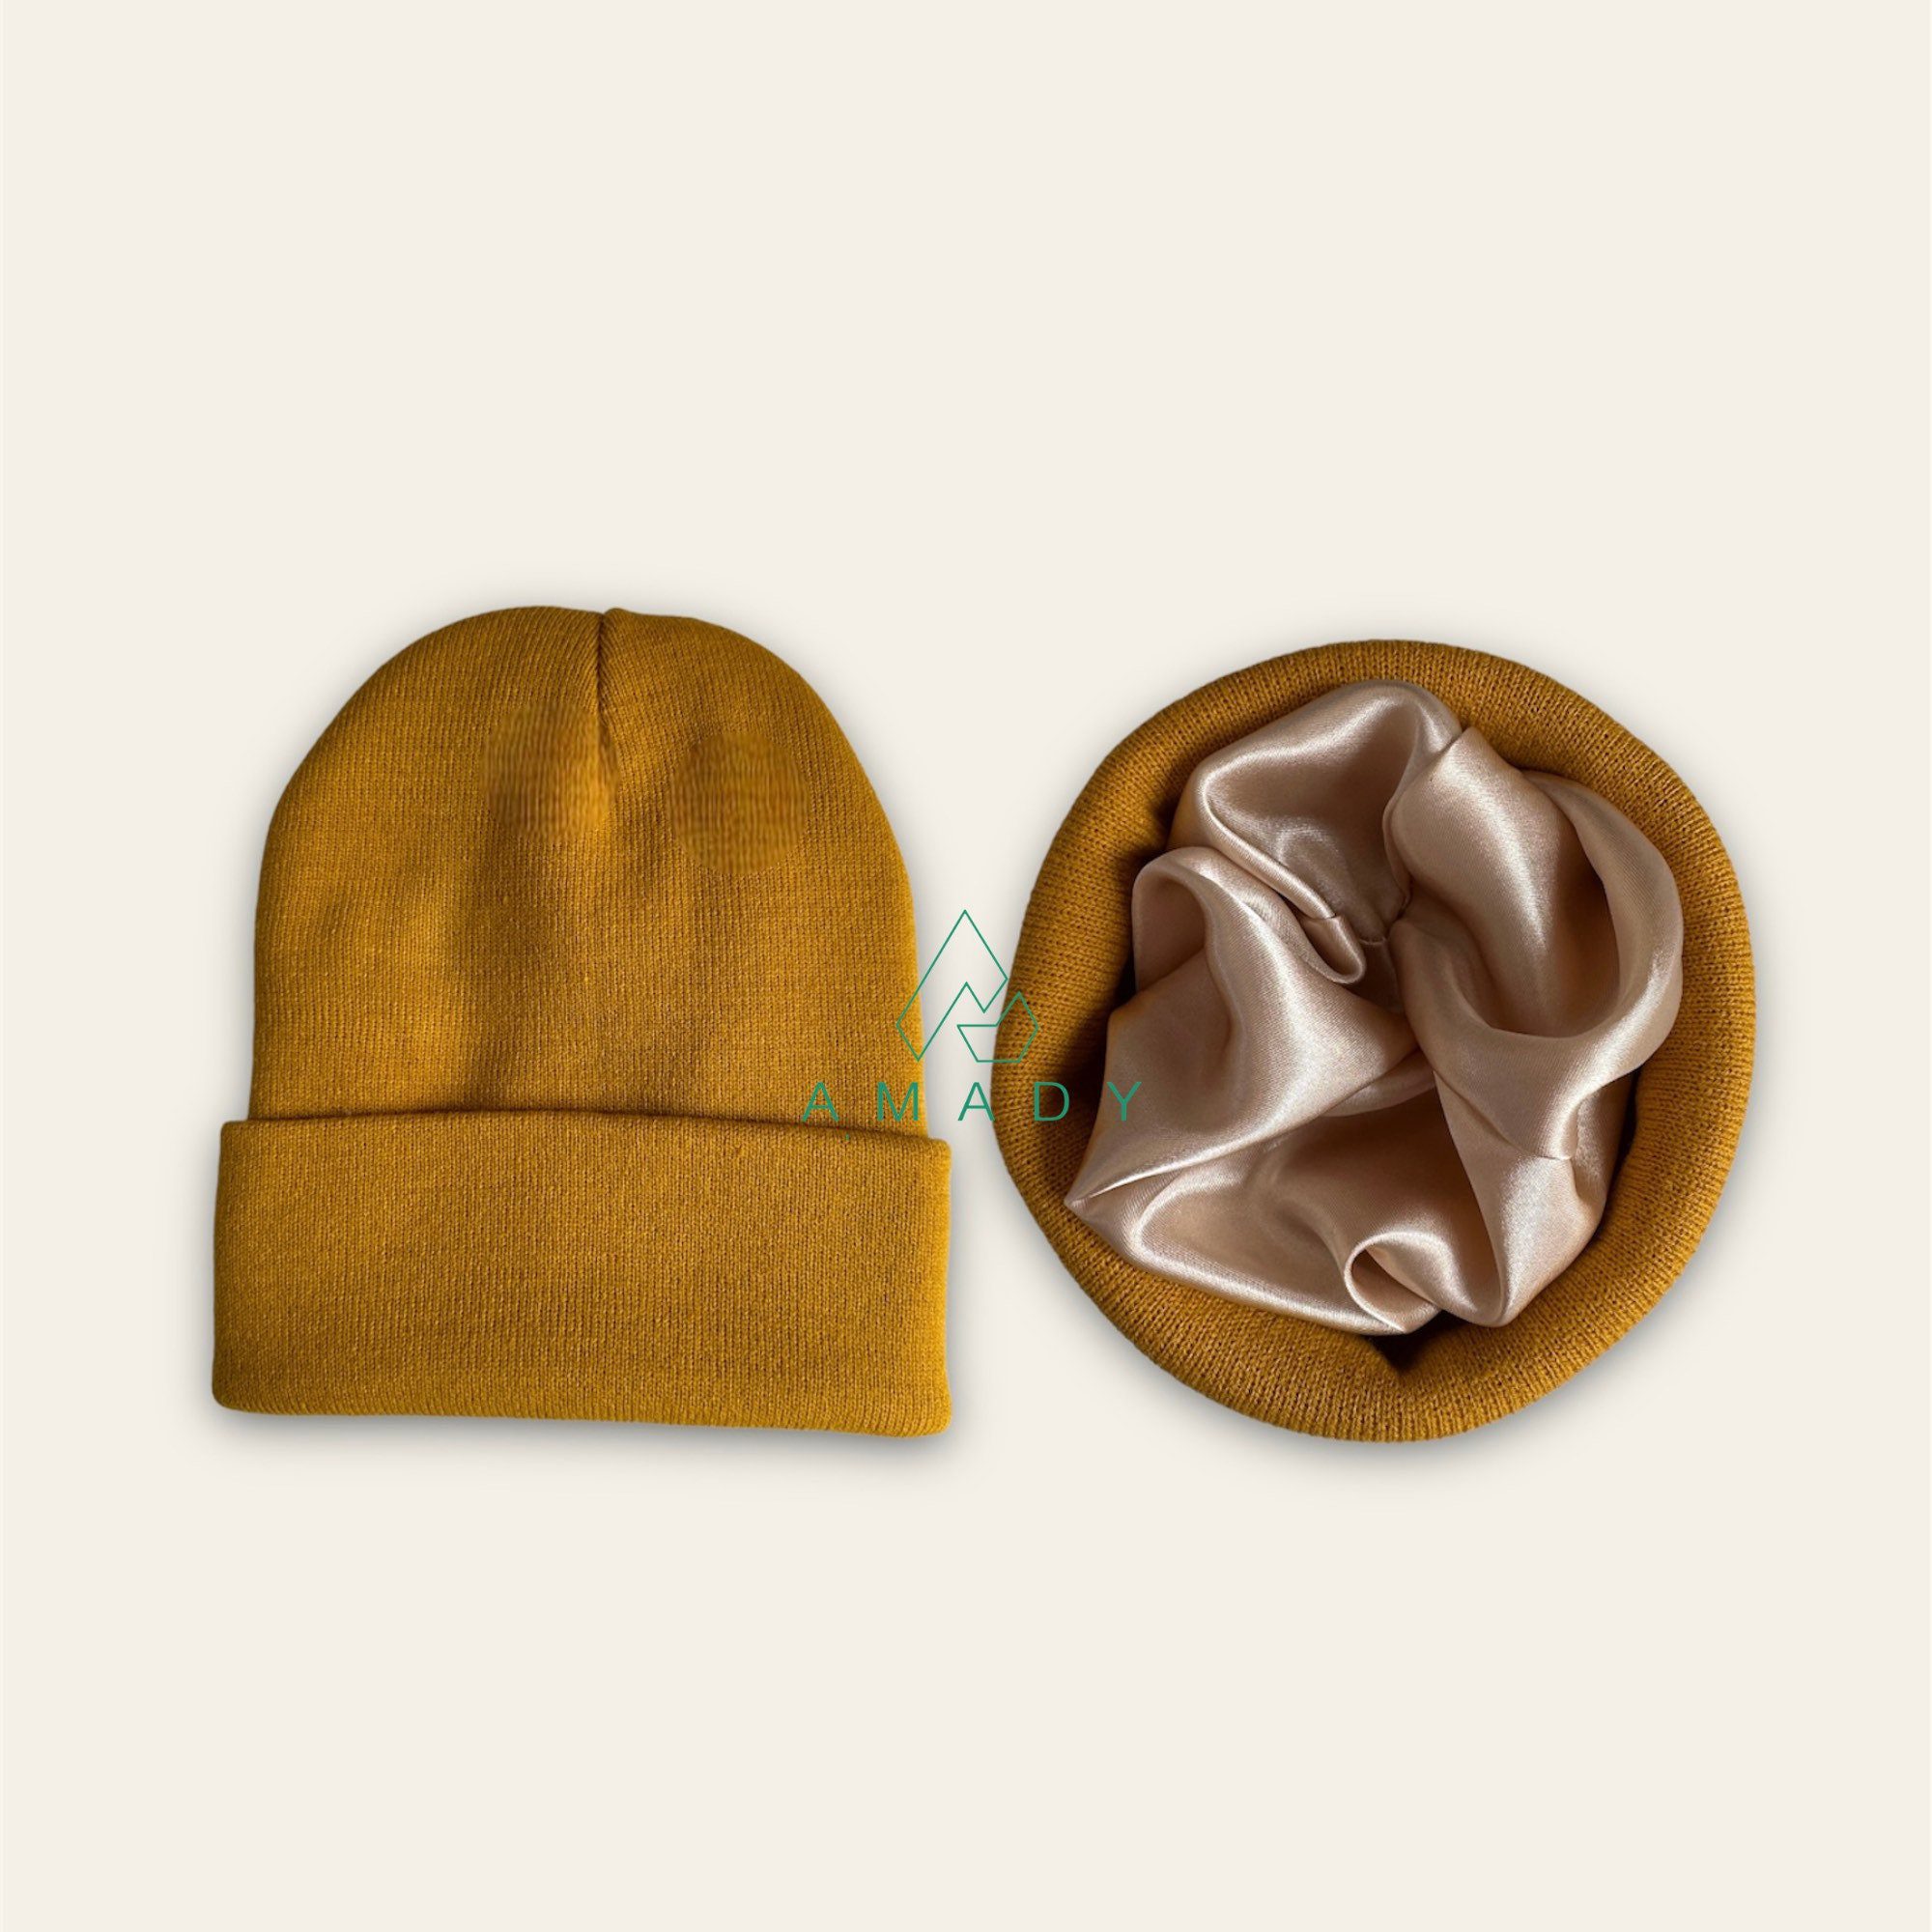 Satin lined beanie hat